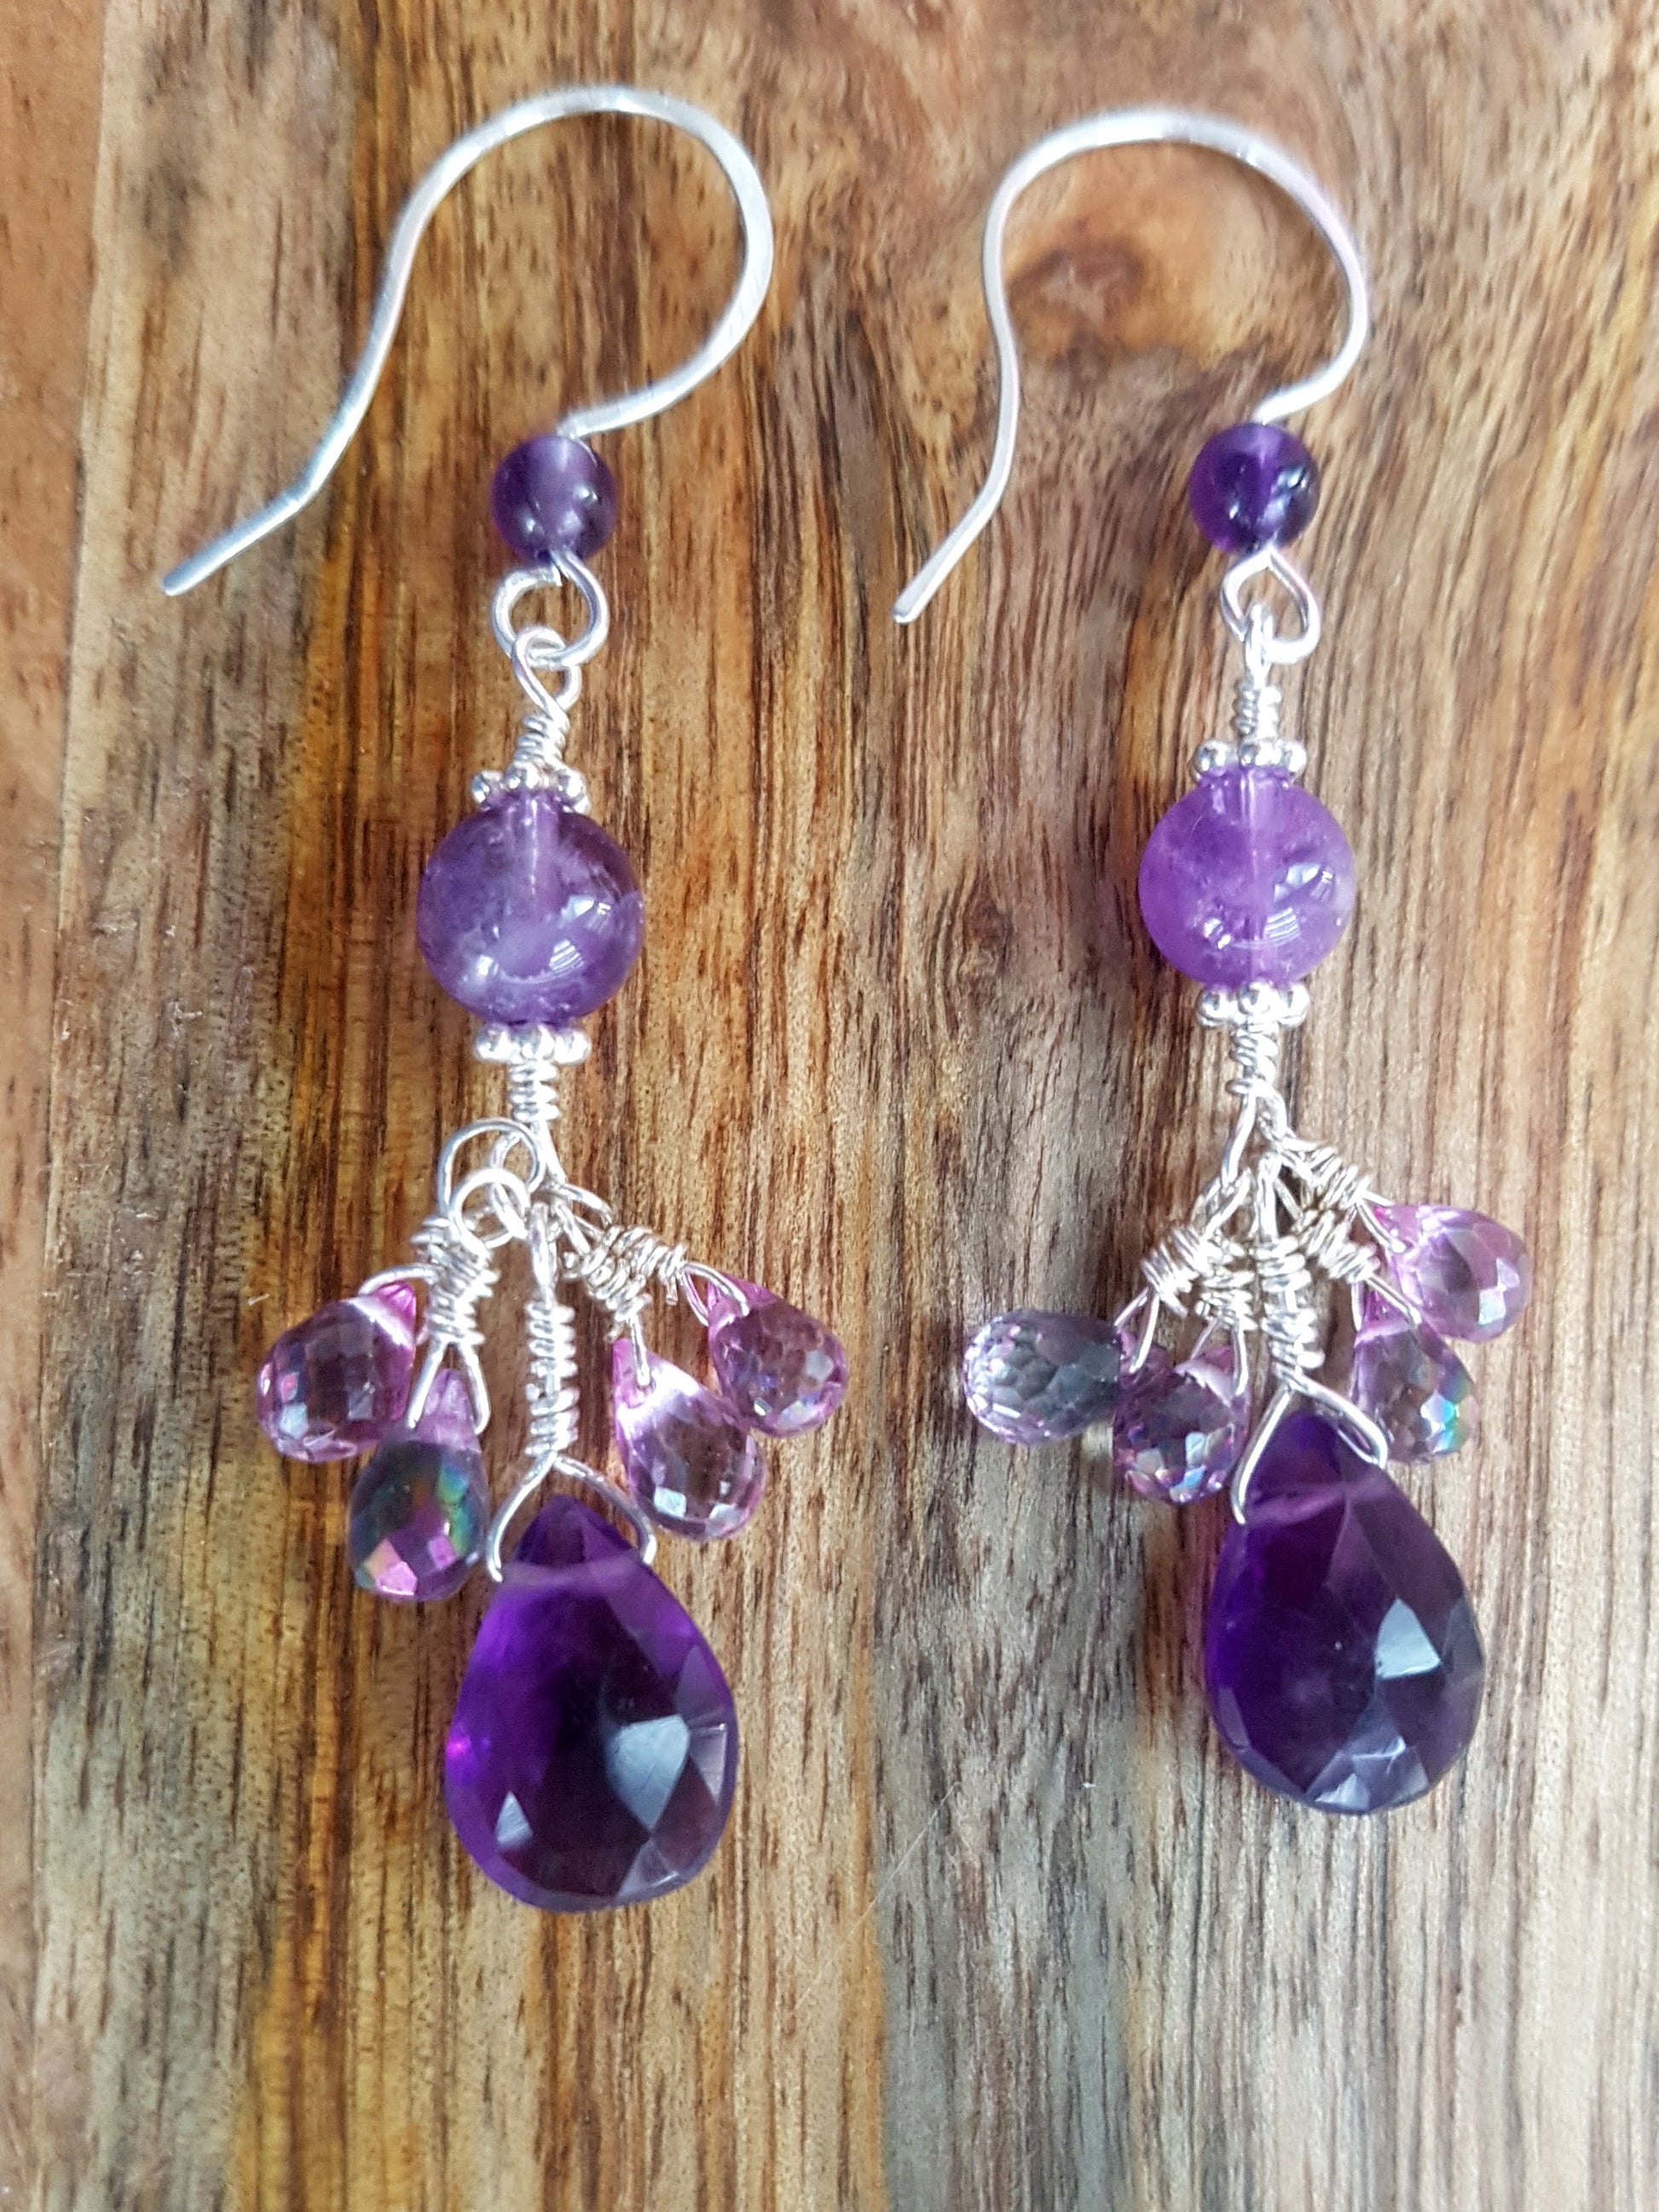 Mystic Topaz Amethyst Exotic Earrings-Handcrafted with High Quality, Faceted Gemstones: Genuine Amethyst & Mystic Topaz